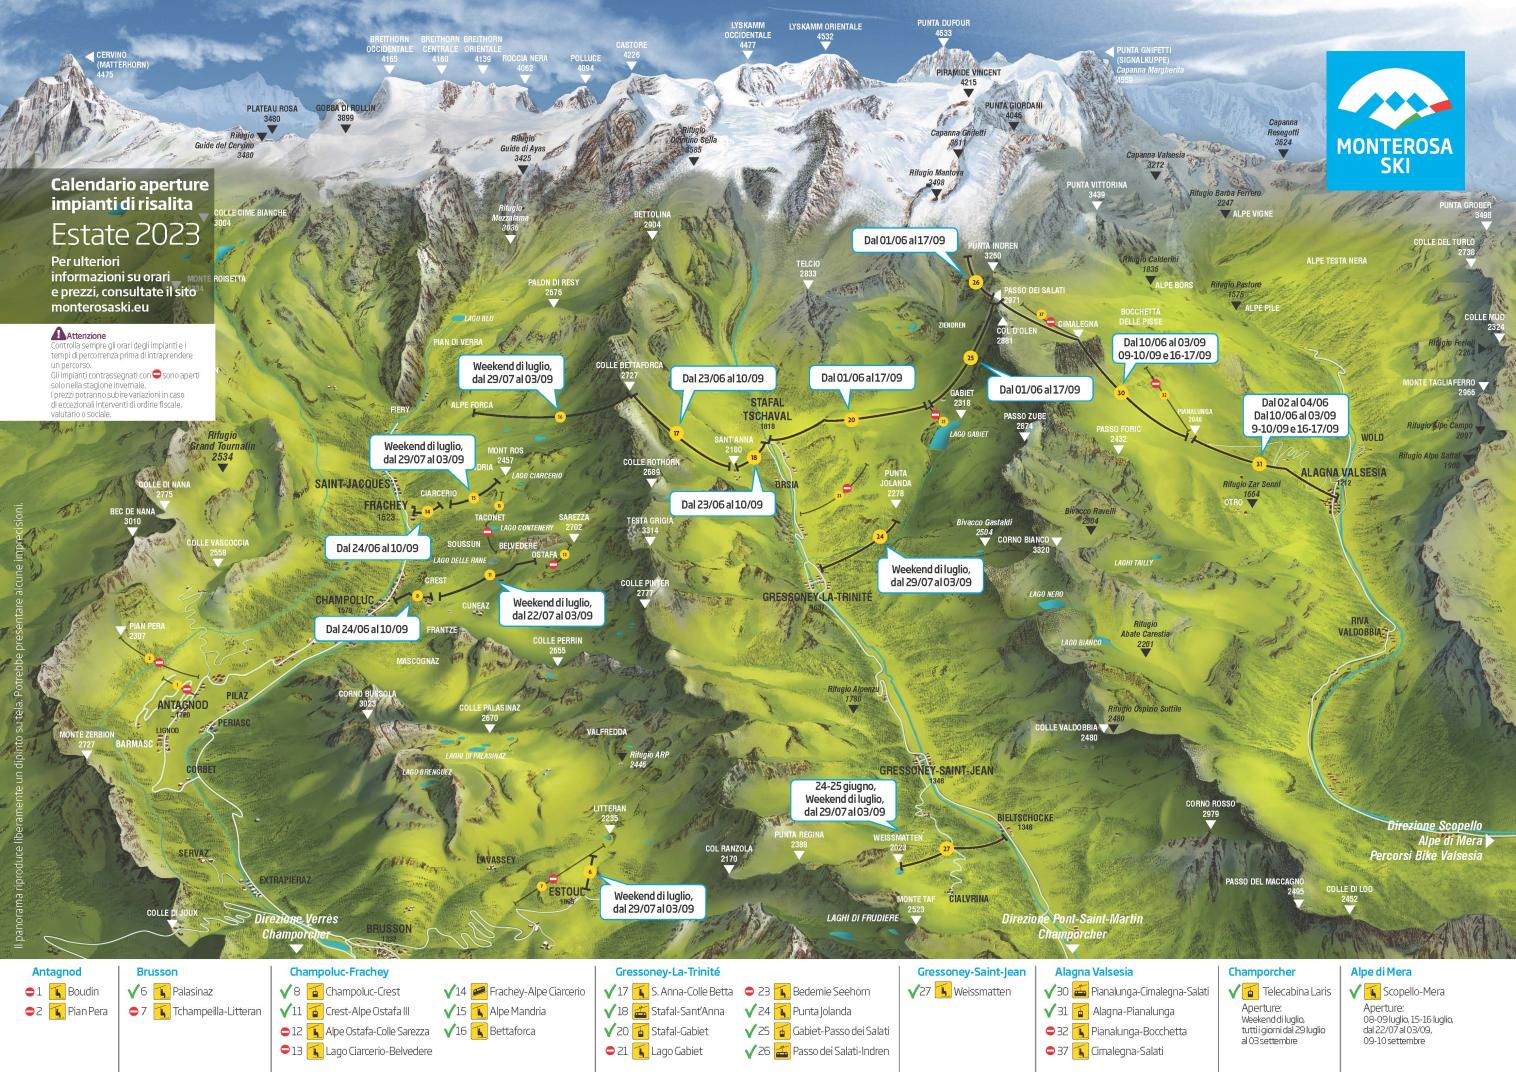 Map of the lifts with the opening dates